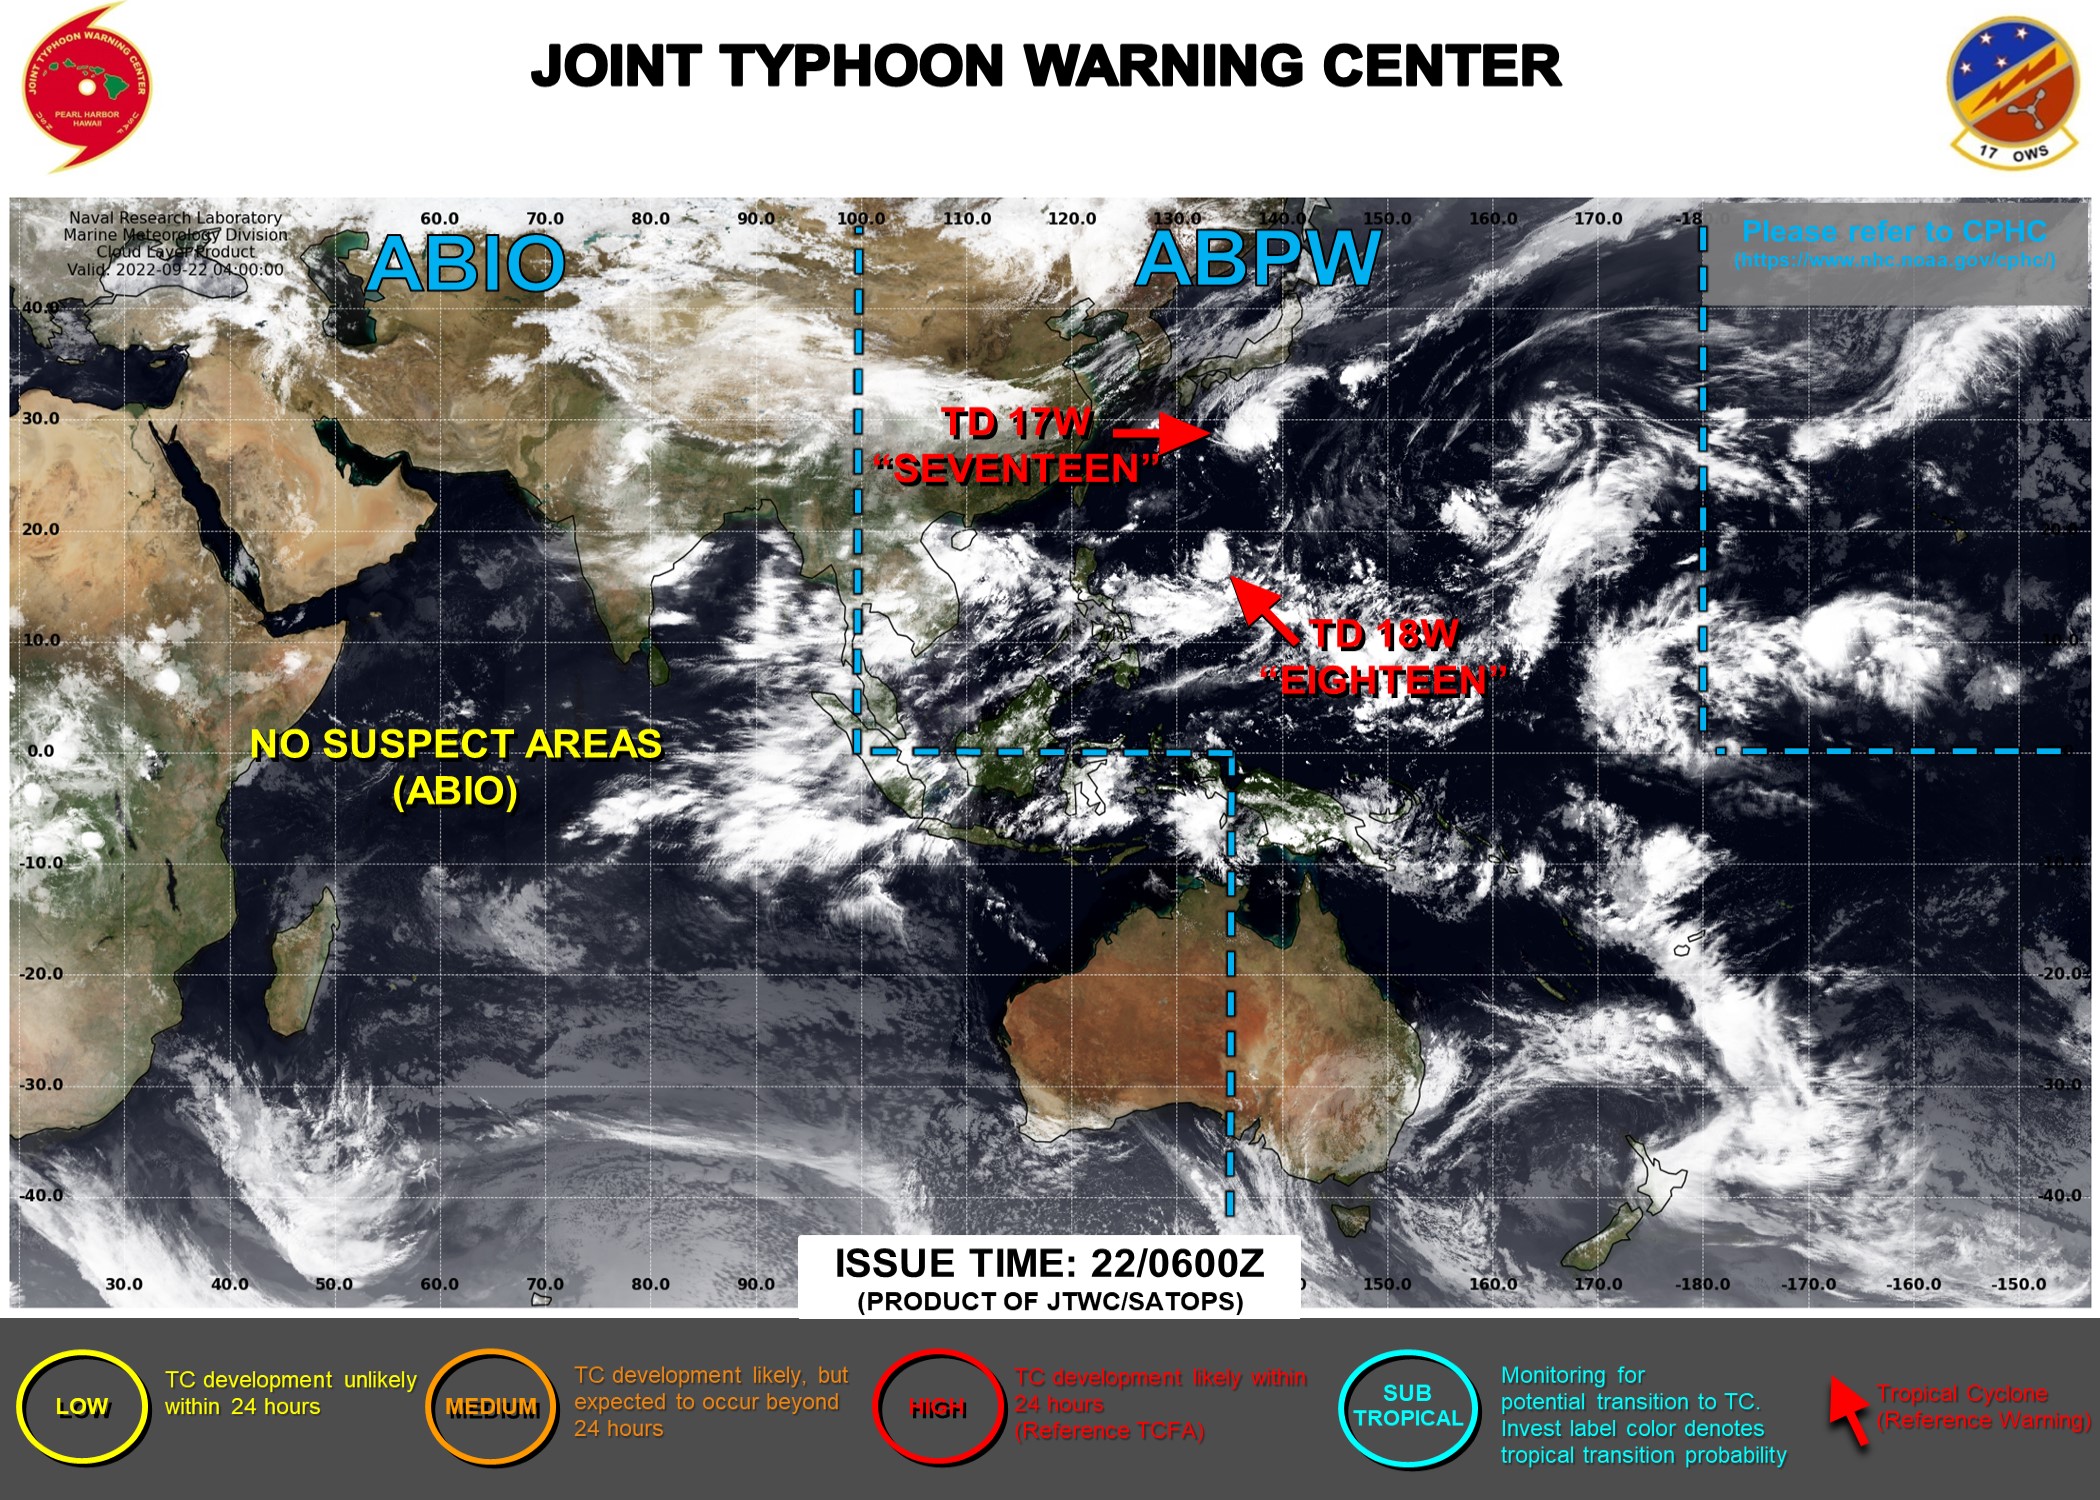 JTWC IS ISSUING 6HOURLY WARNINGS AND 3HOURLY SATELLITE BULLETINS ON 17W AND 18W.